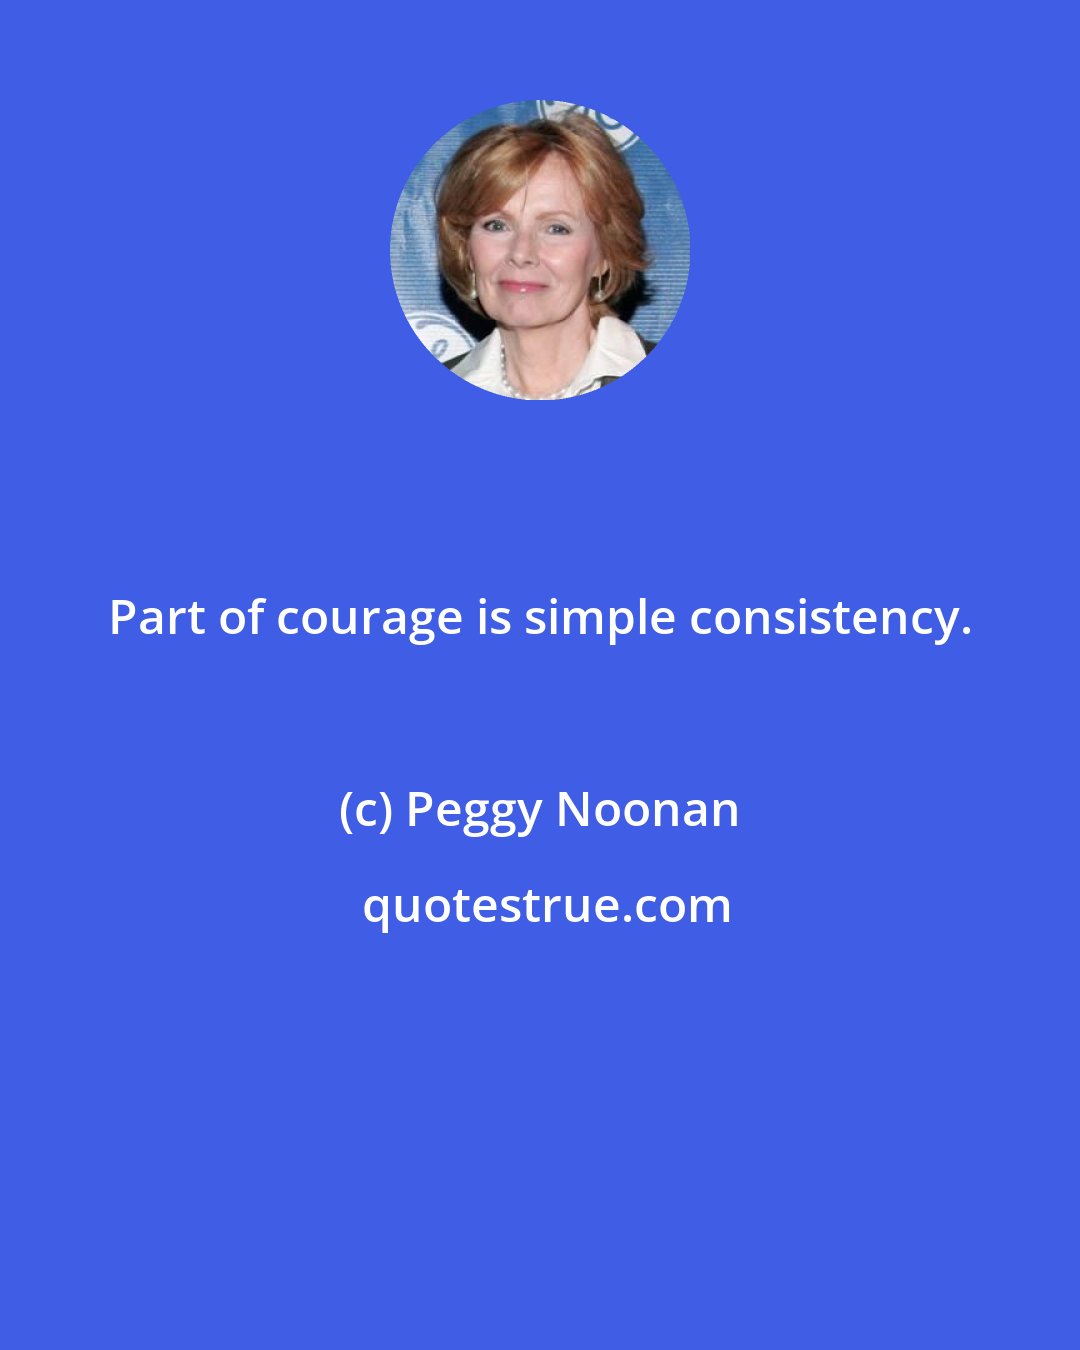 Peggy Noonan: Part of courage is simple consistency.